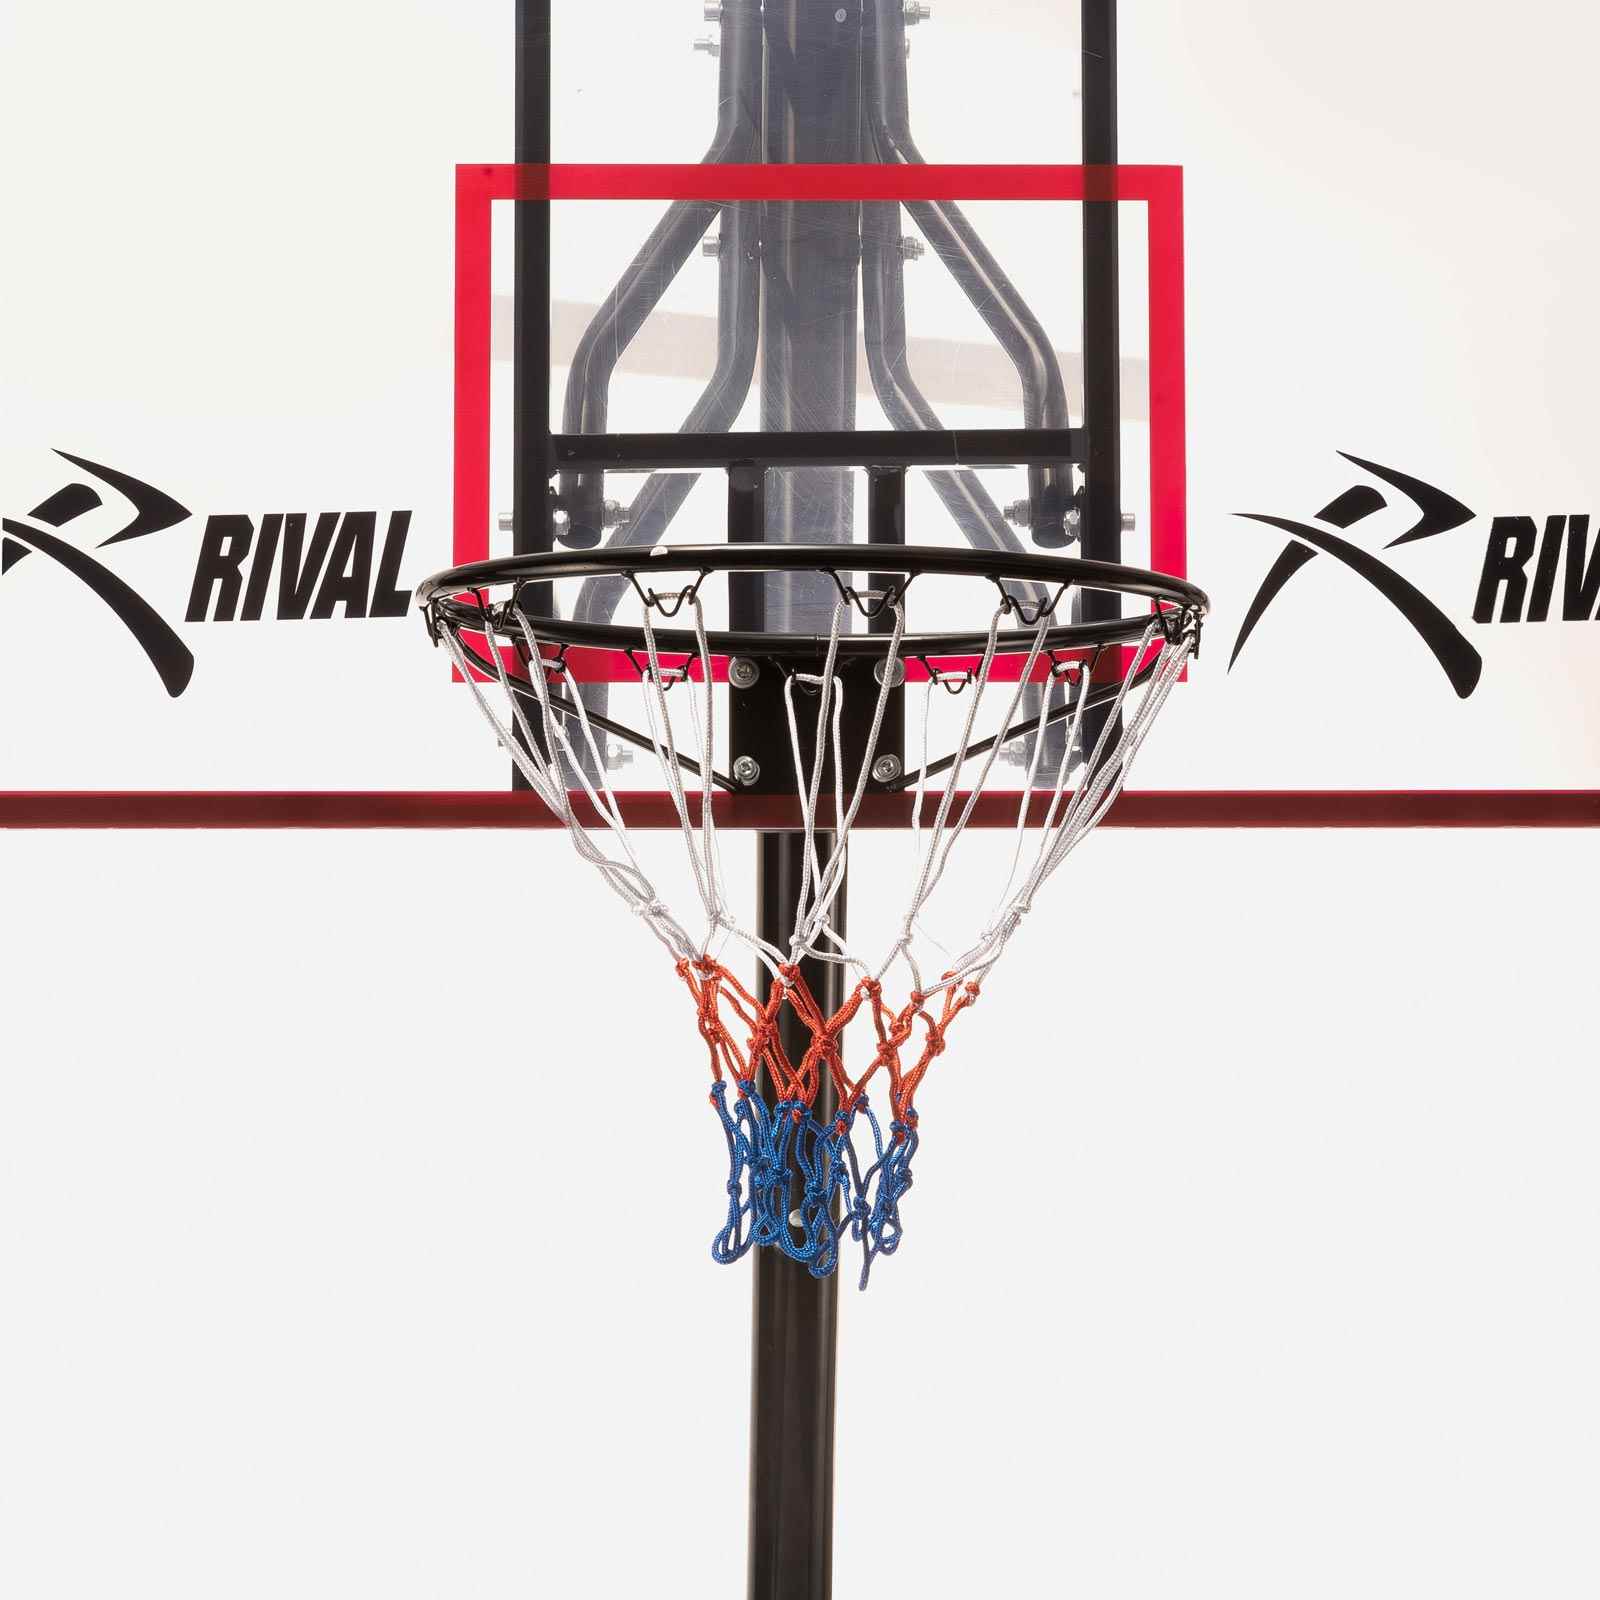 RIVAL BOSTON BASKETBALL HOOP & STAND SYSTEM